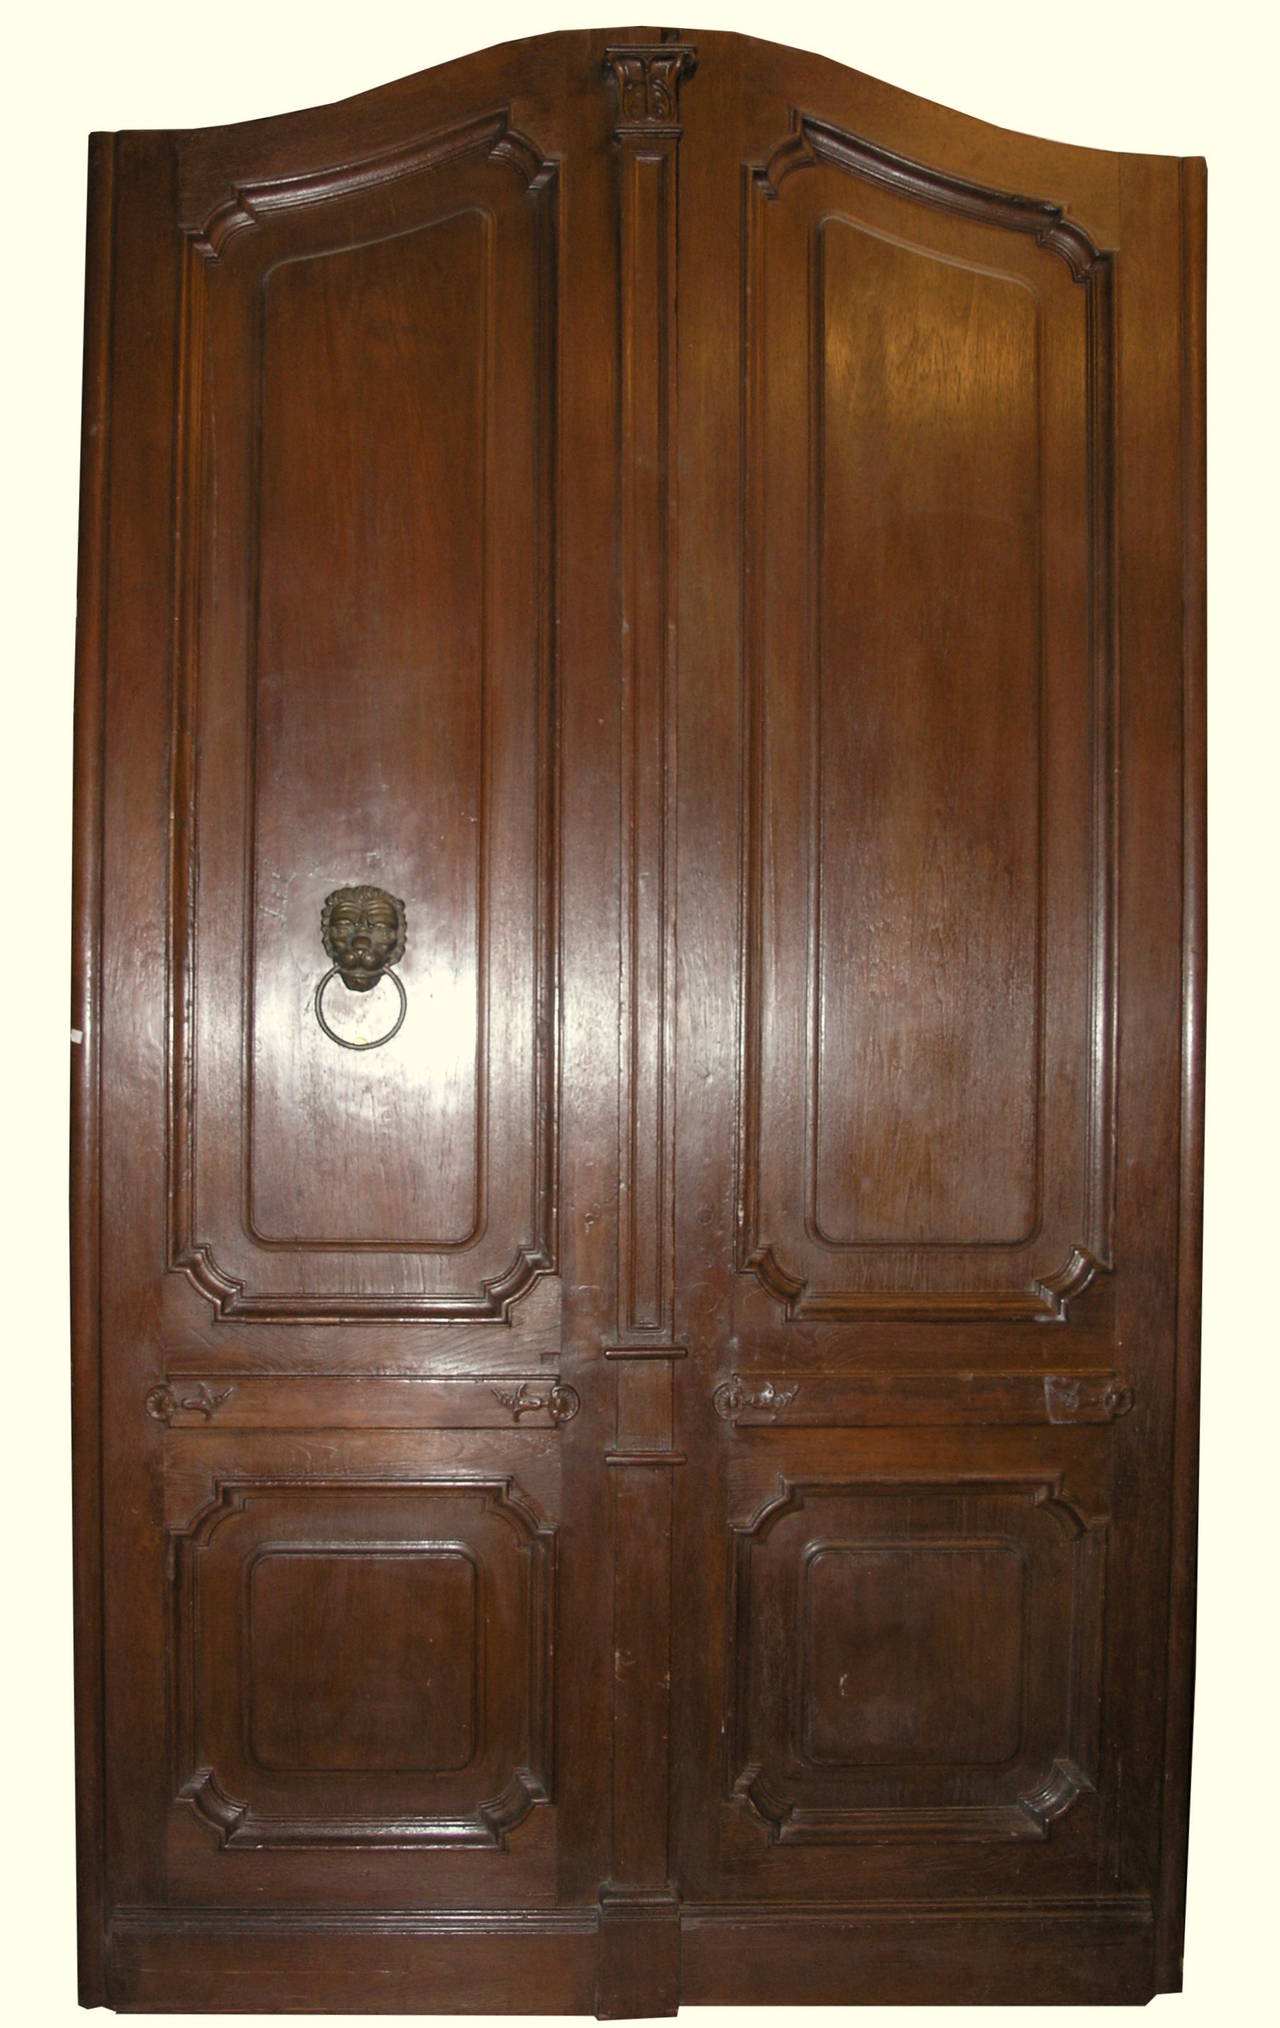 Antique door made of walnut.
Comes from Italy.